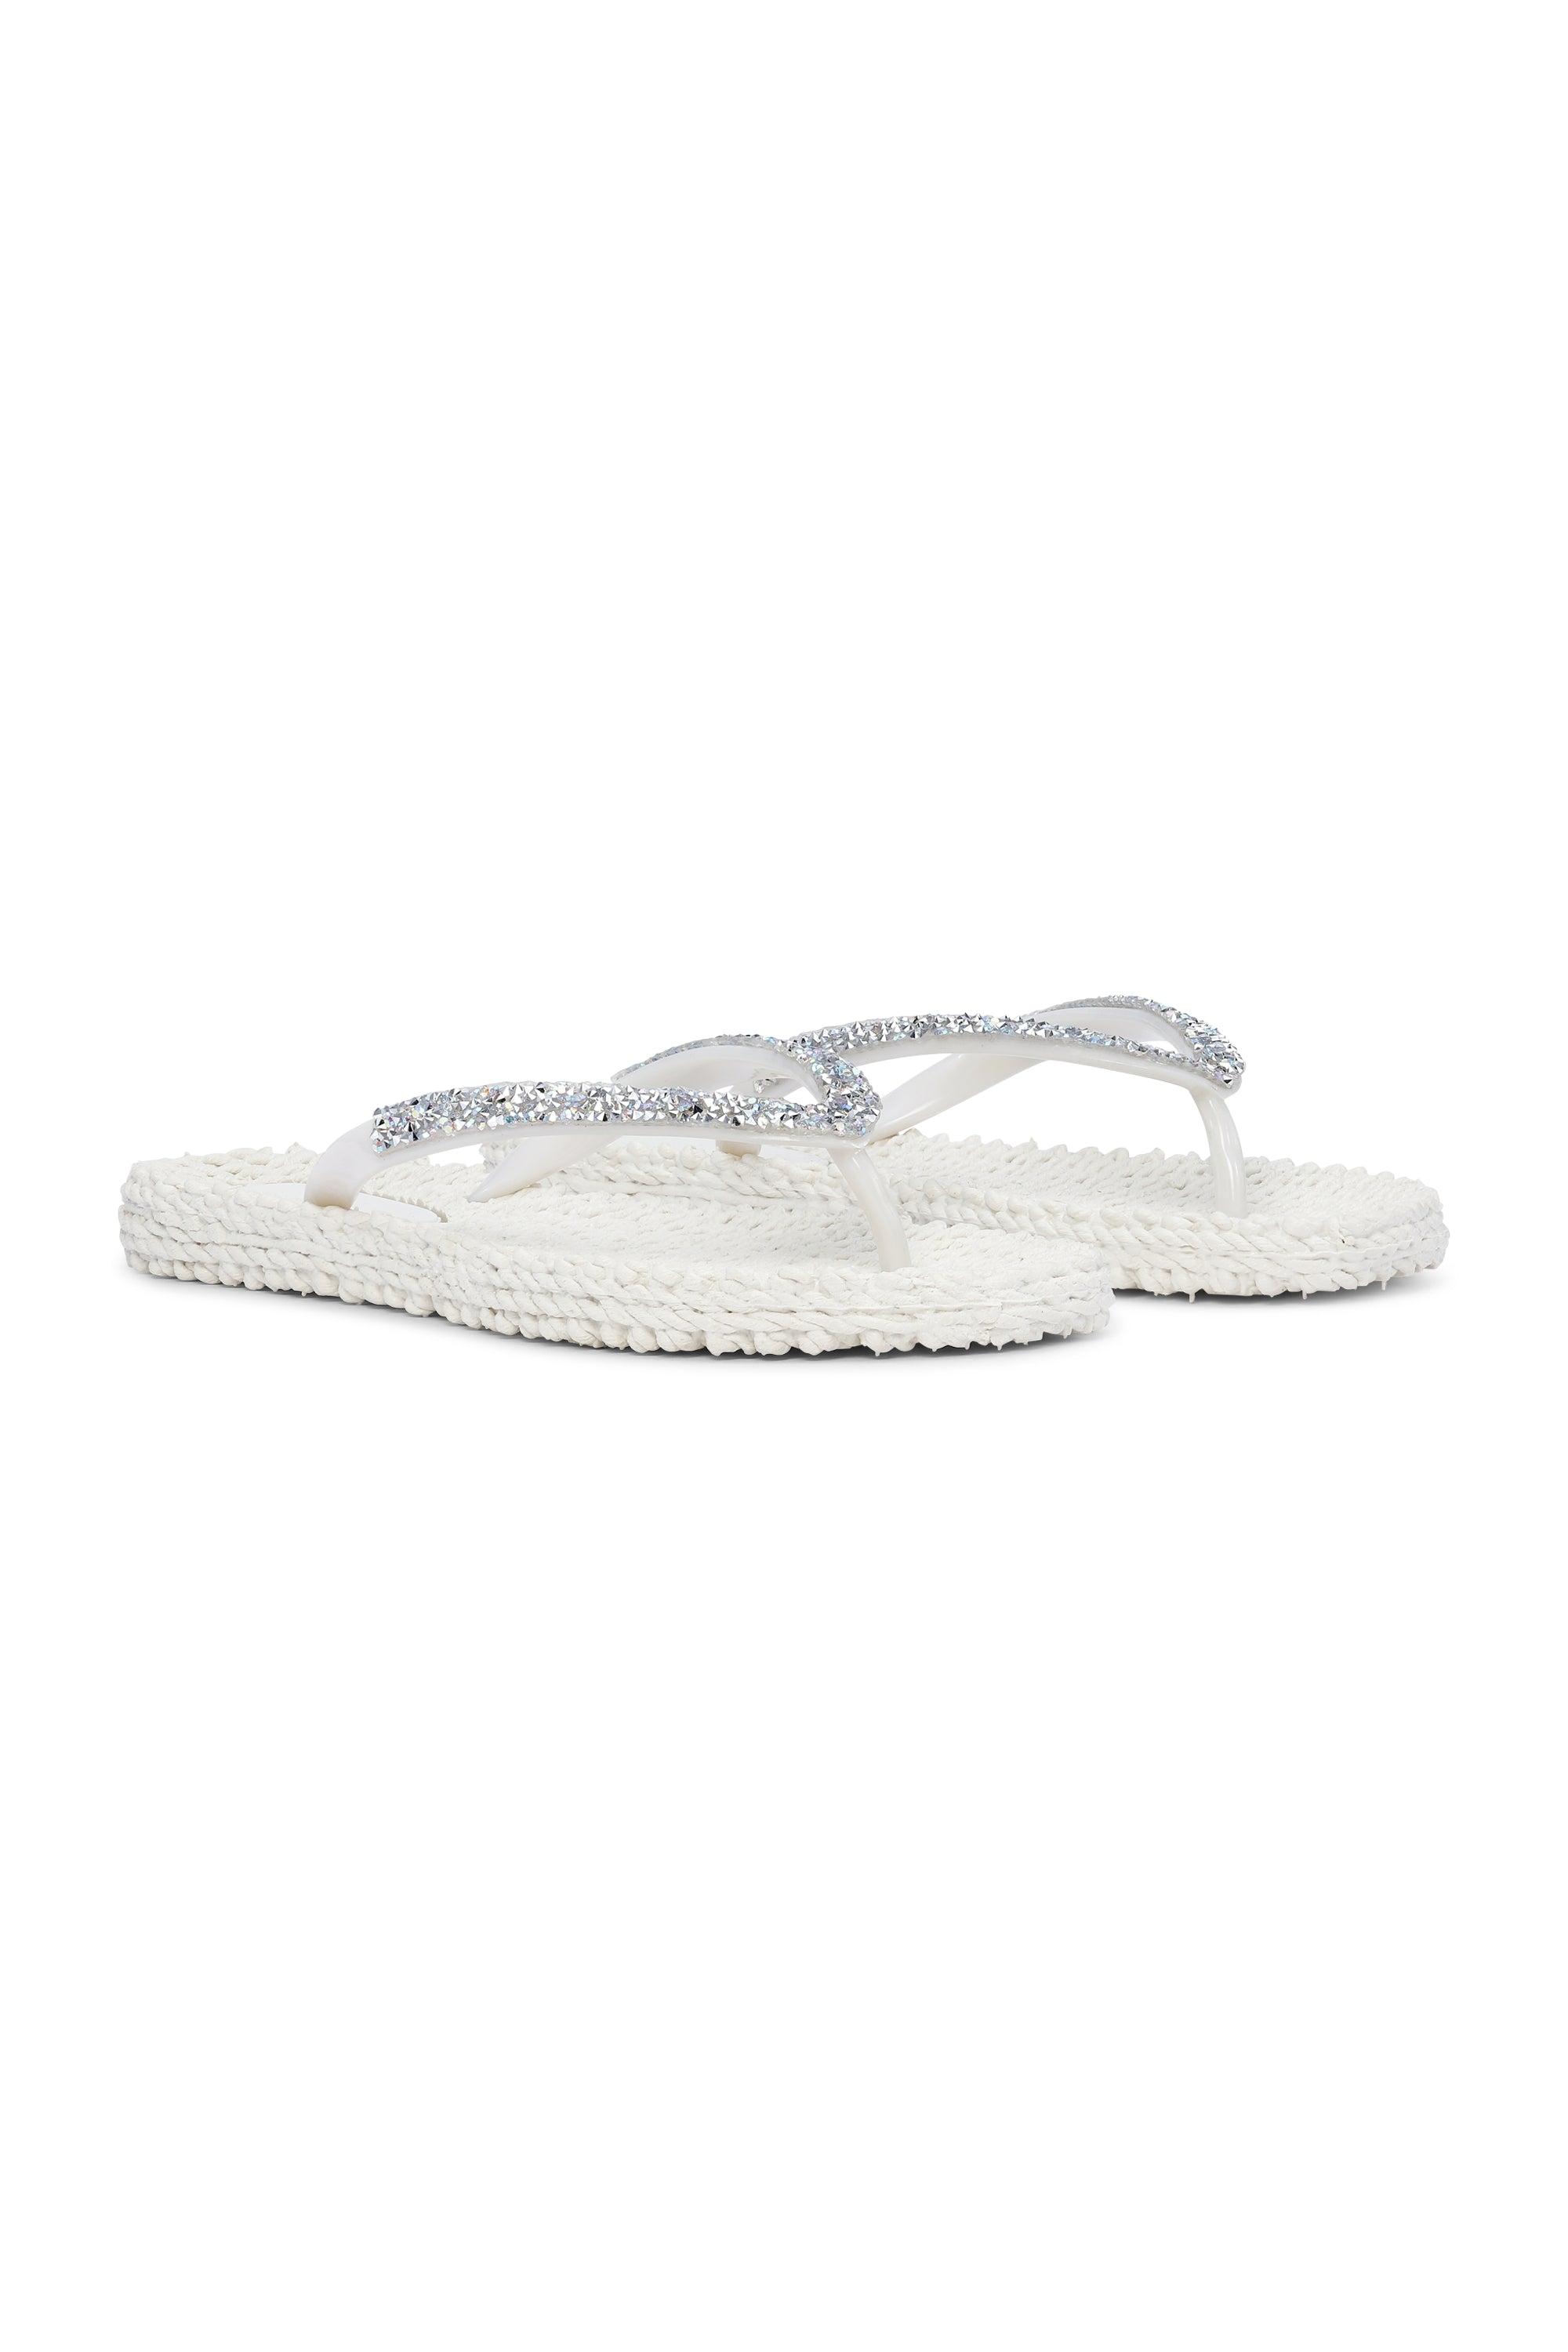 Flip Flop in color creme with glitter strips by Ilse Jacobsen